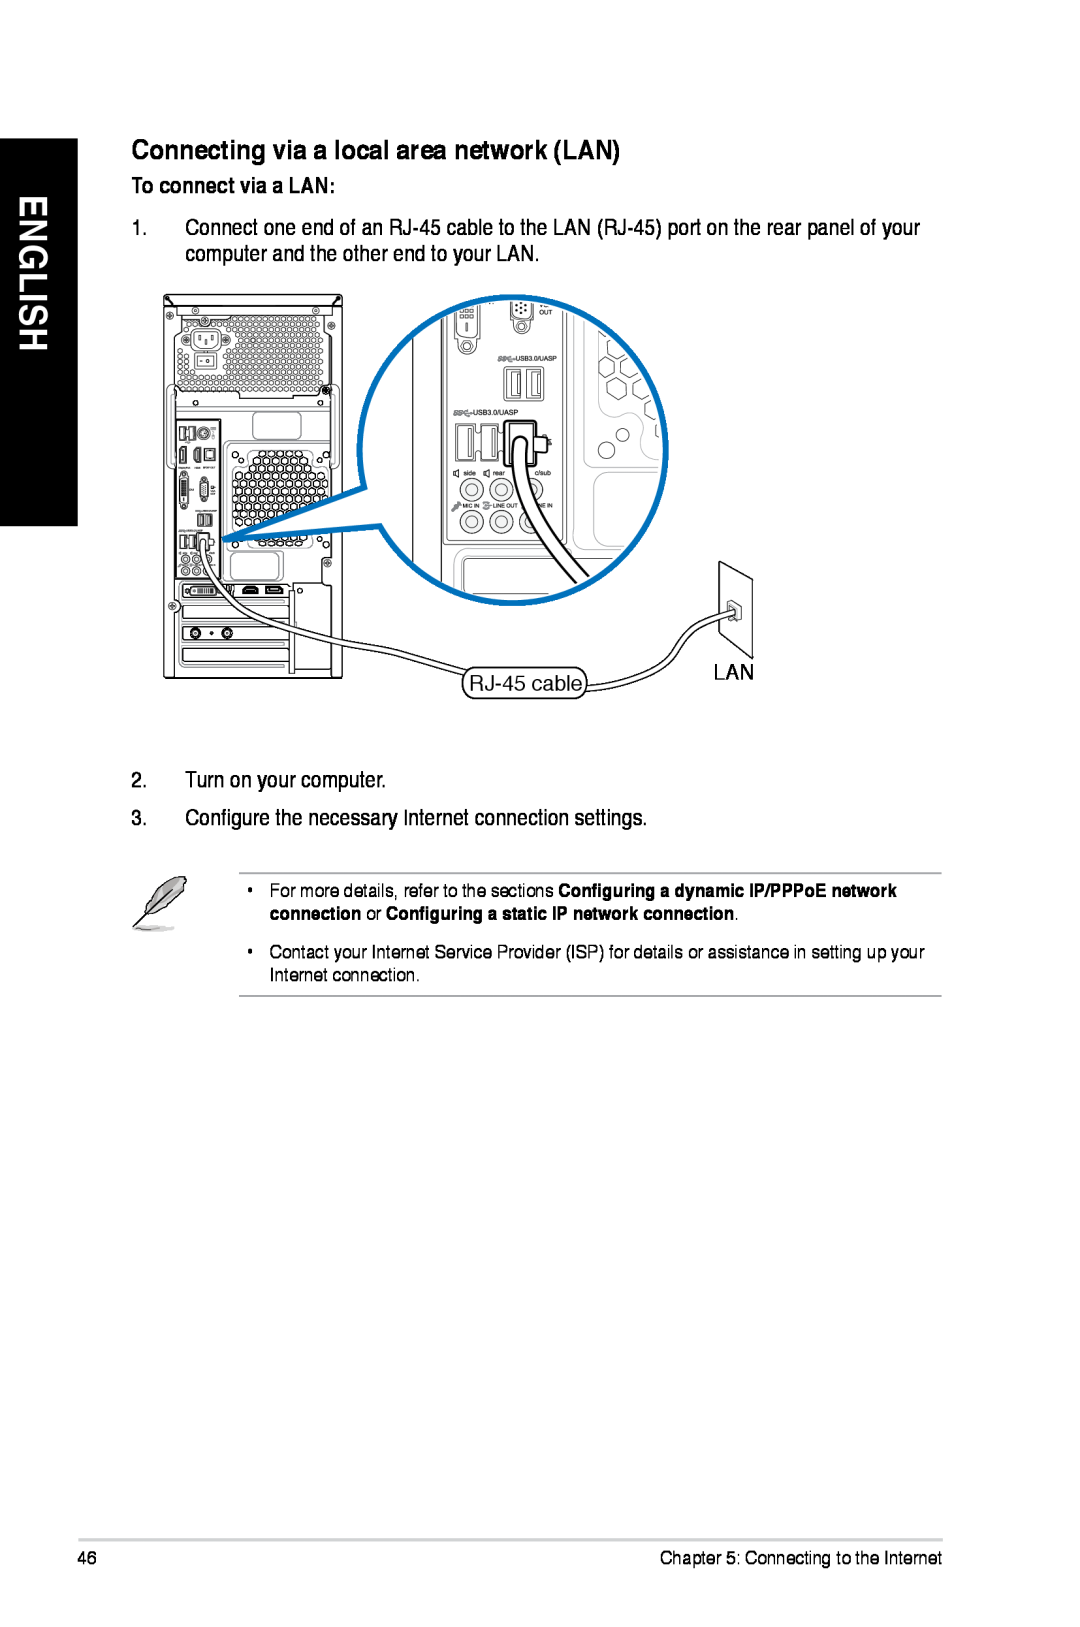 Asus M51ACUS002S, M51ACUS006S, M51BCUS005S user manual English, Connecting via a local area network LAN, To connect via a LAN 